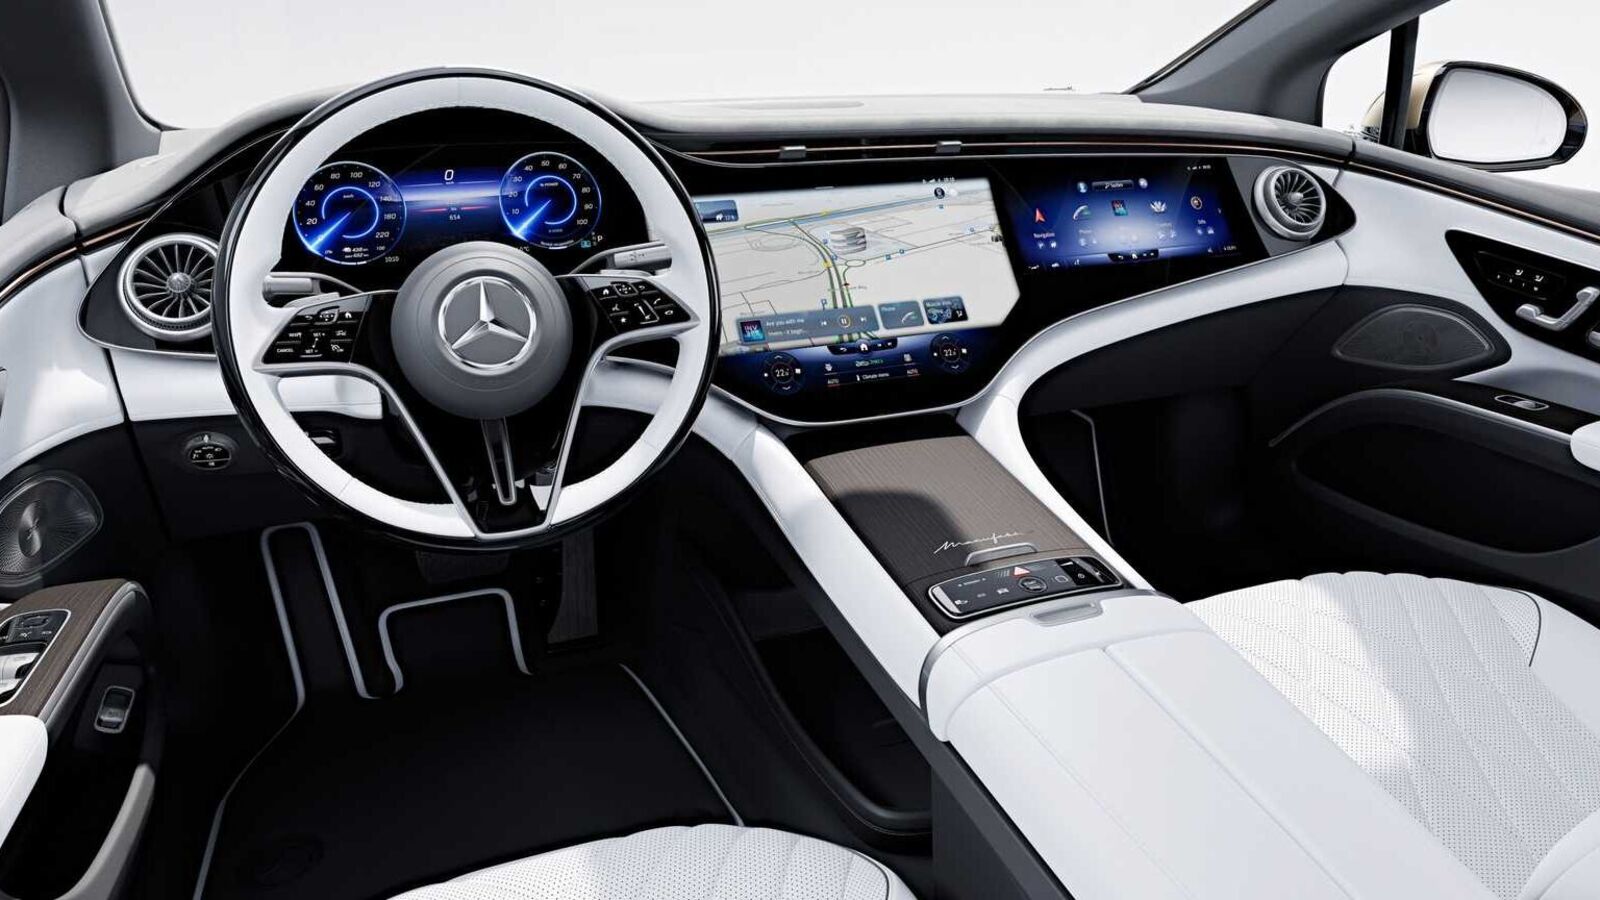 Mercedes aims to earn big bucks from in-car software, will take